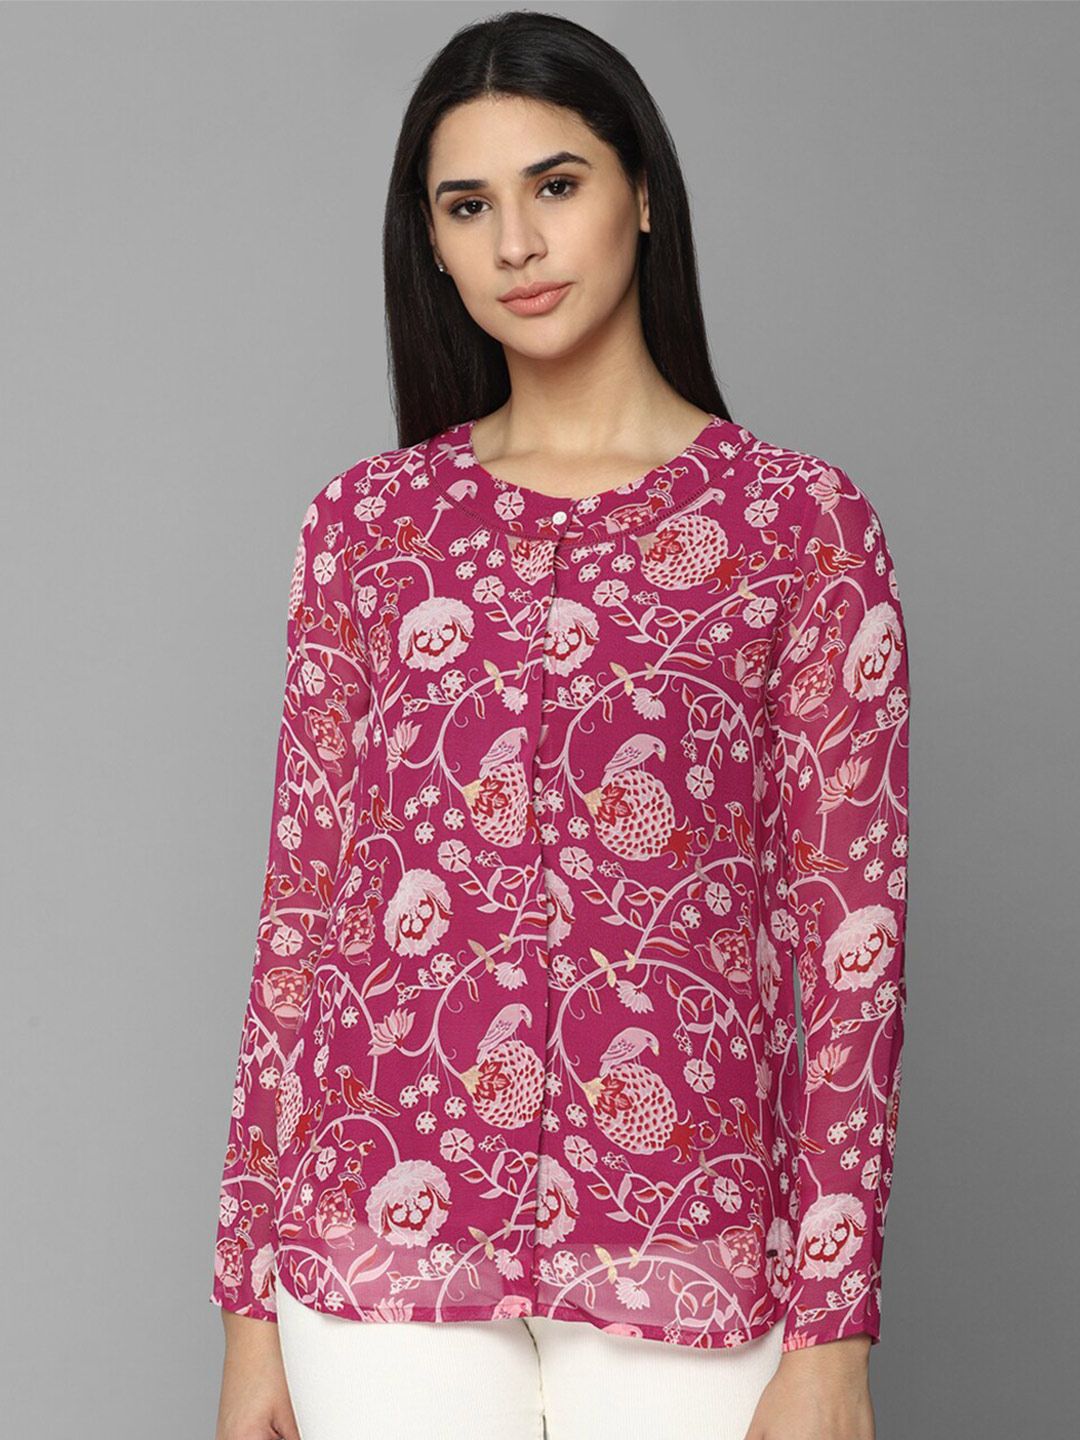 Allen Solly Woman Print Shirt Style Top Price in India